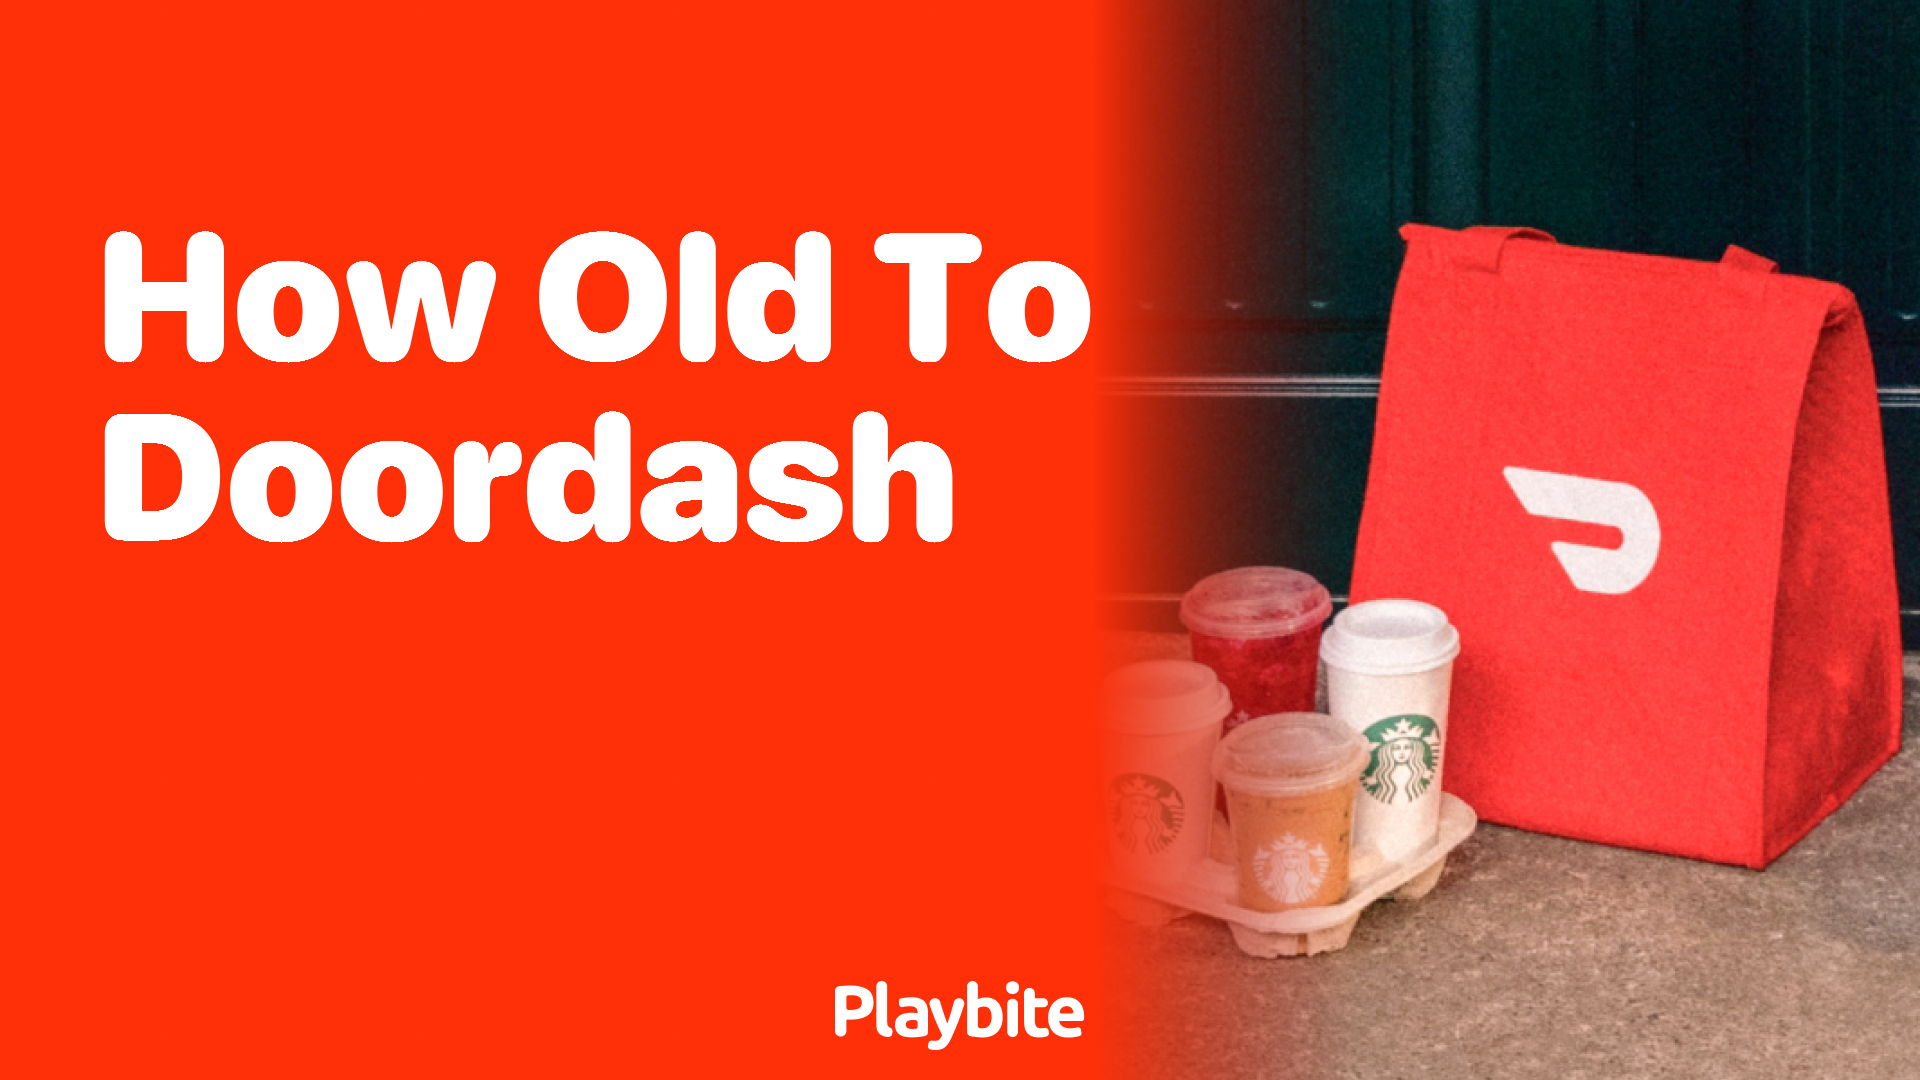 How Old Do You Have to Be to Doordash: Ultimate Guide